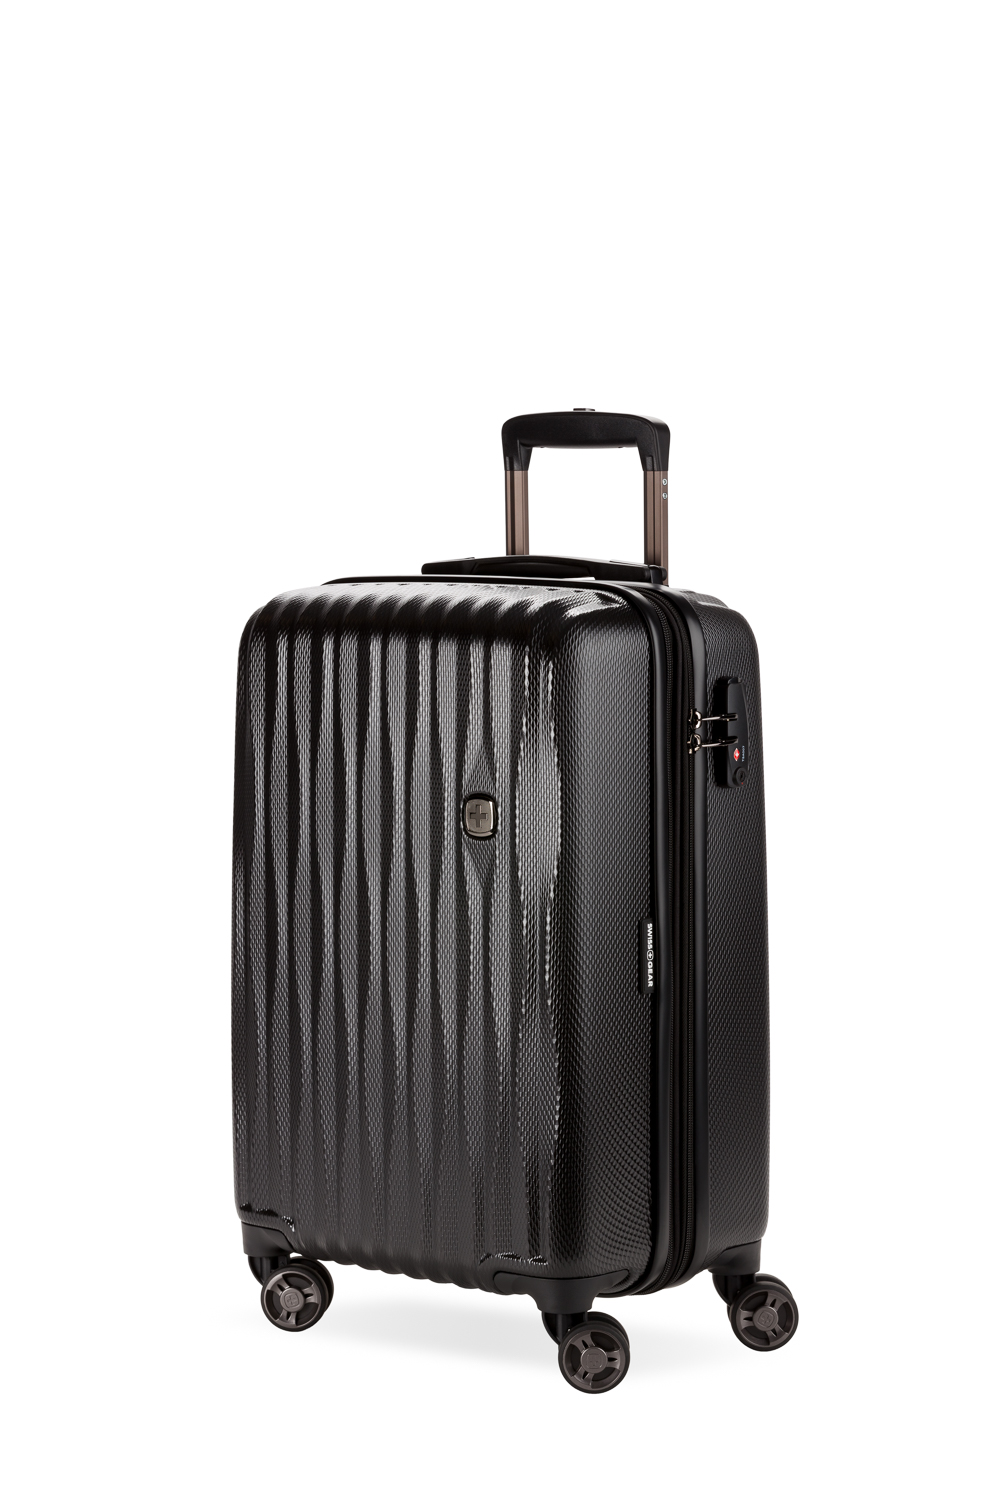 Carry-On Luggage Olive SWISSGEAR 7272 Energie Hardside Polycarbonate Spinner 